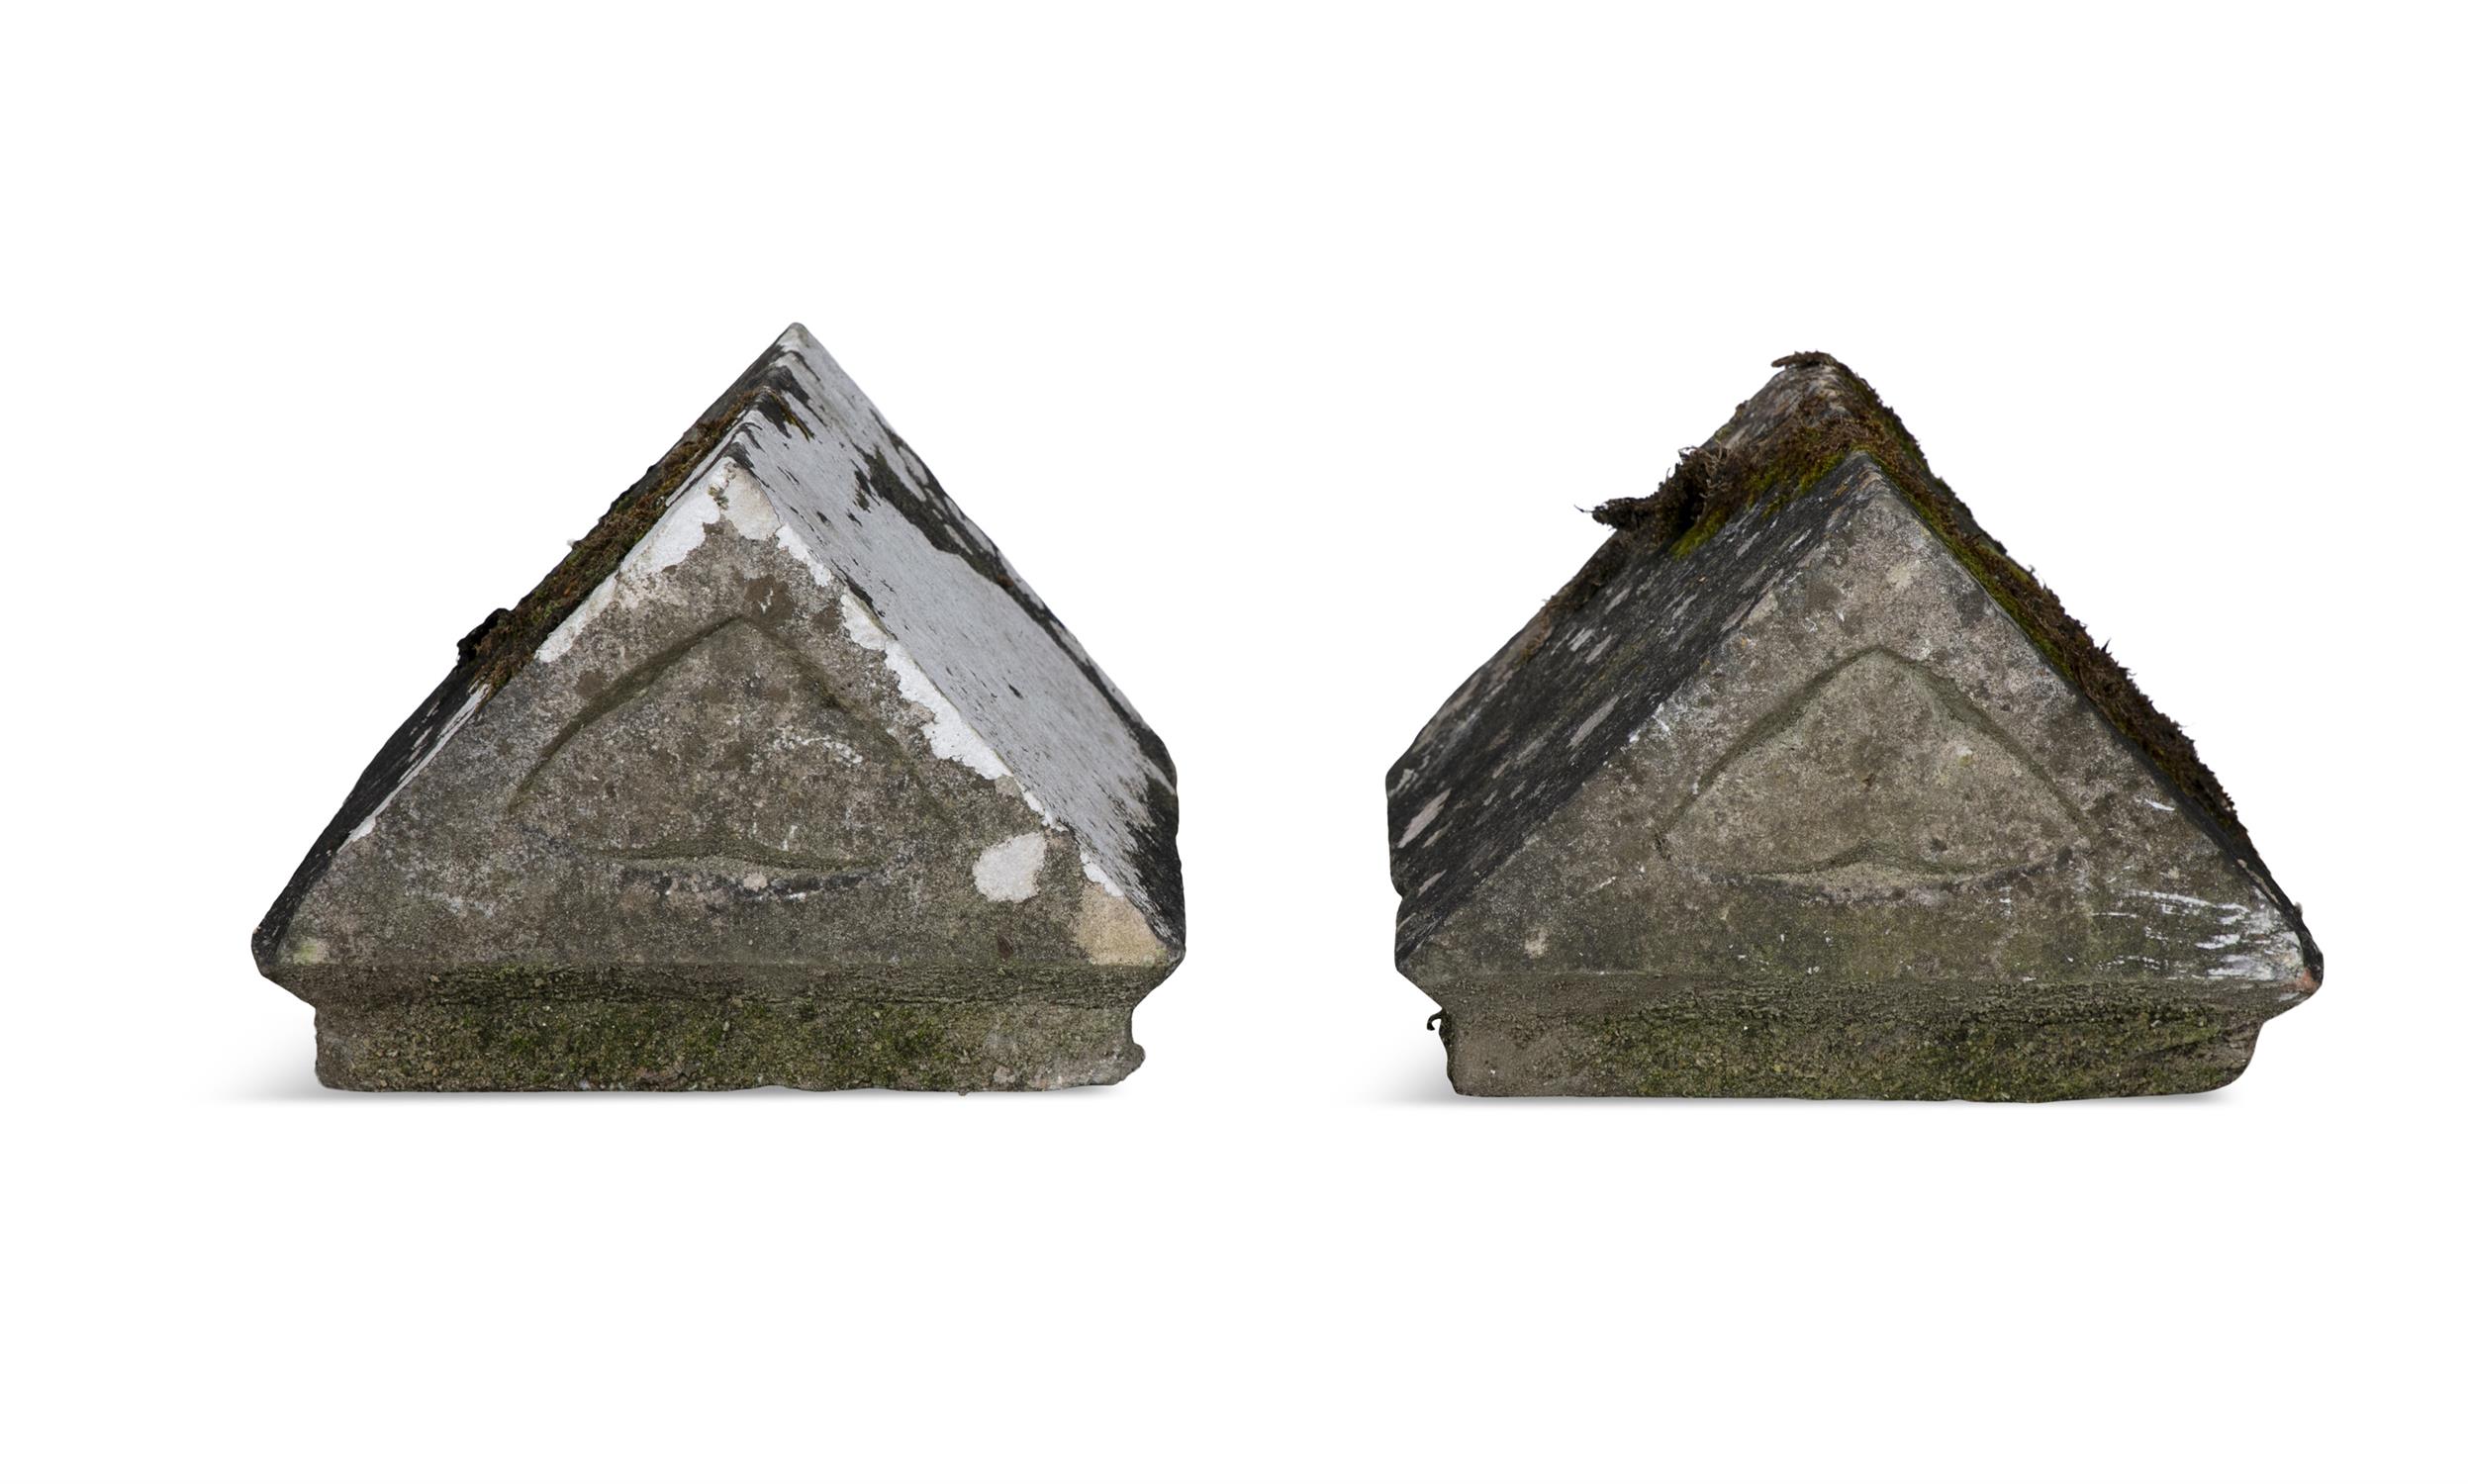 A PAIR OF EARLY 19TH CENTURY IRISH LIMESTONE PILAR CARS, of triangular form with carved